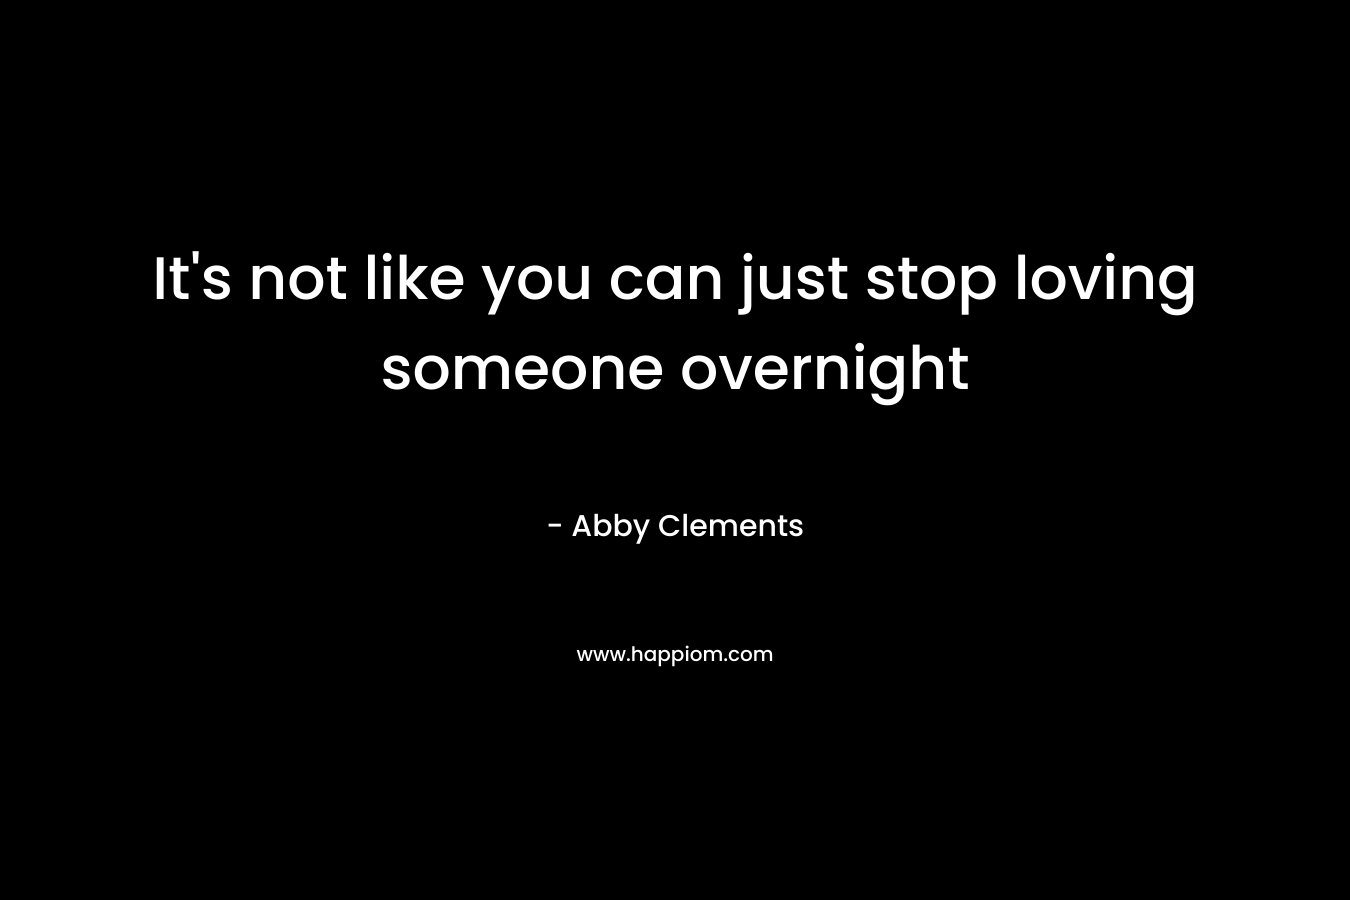 It’s not like you can just stop loving someone overnight – Abby Clements